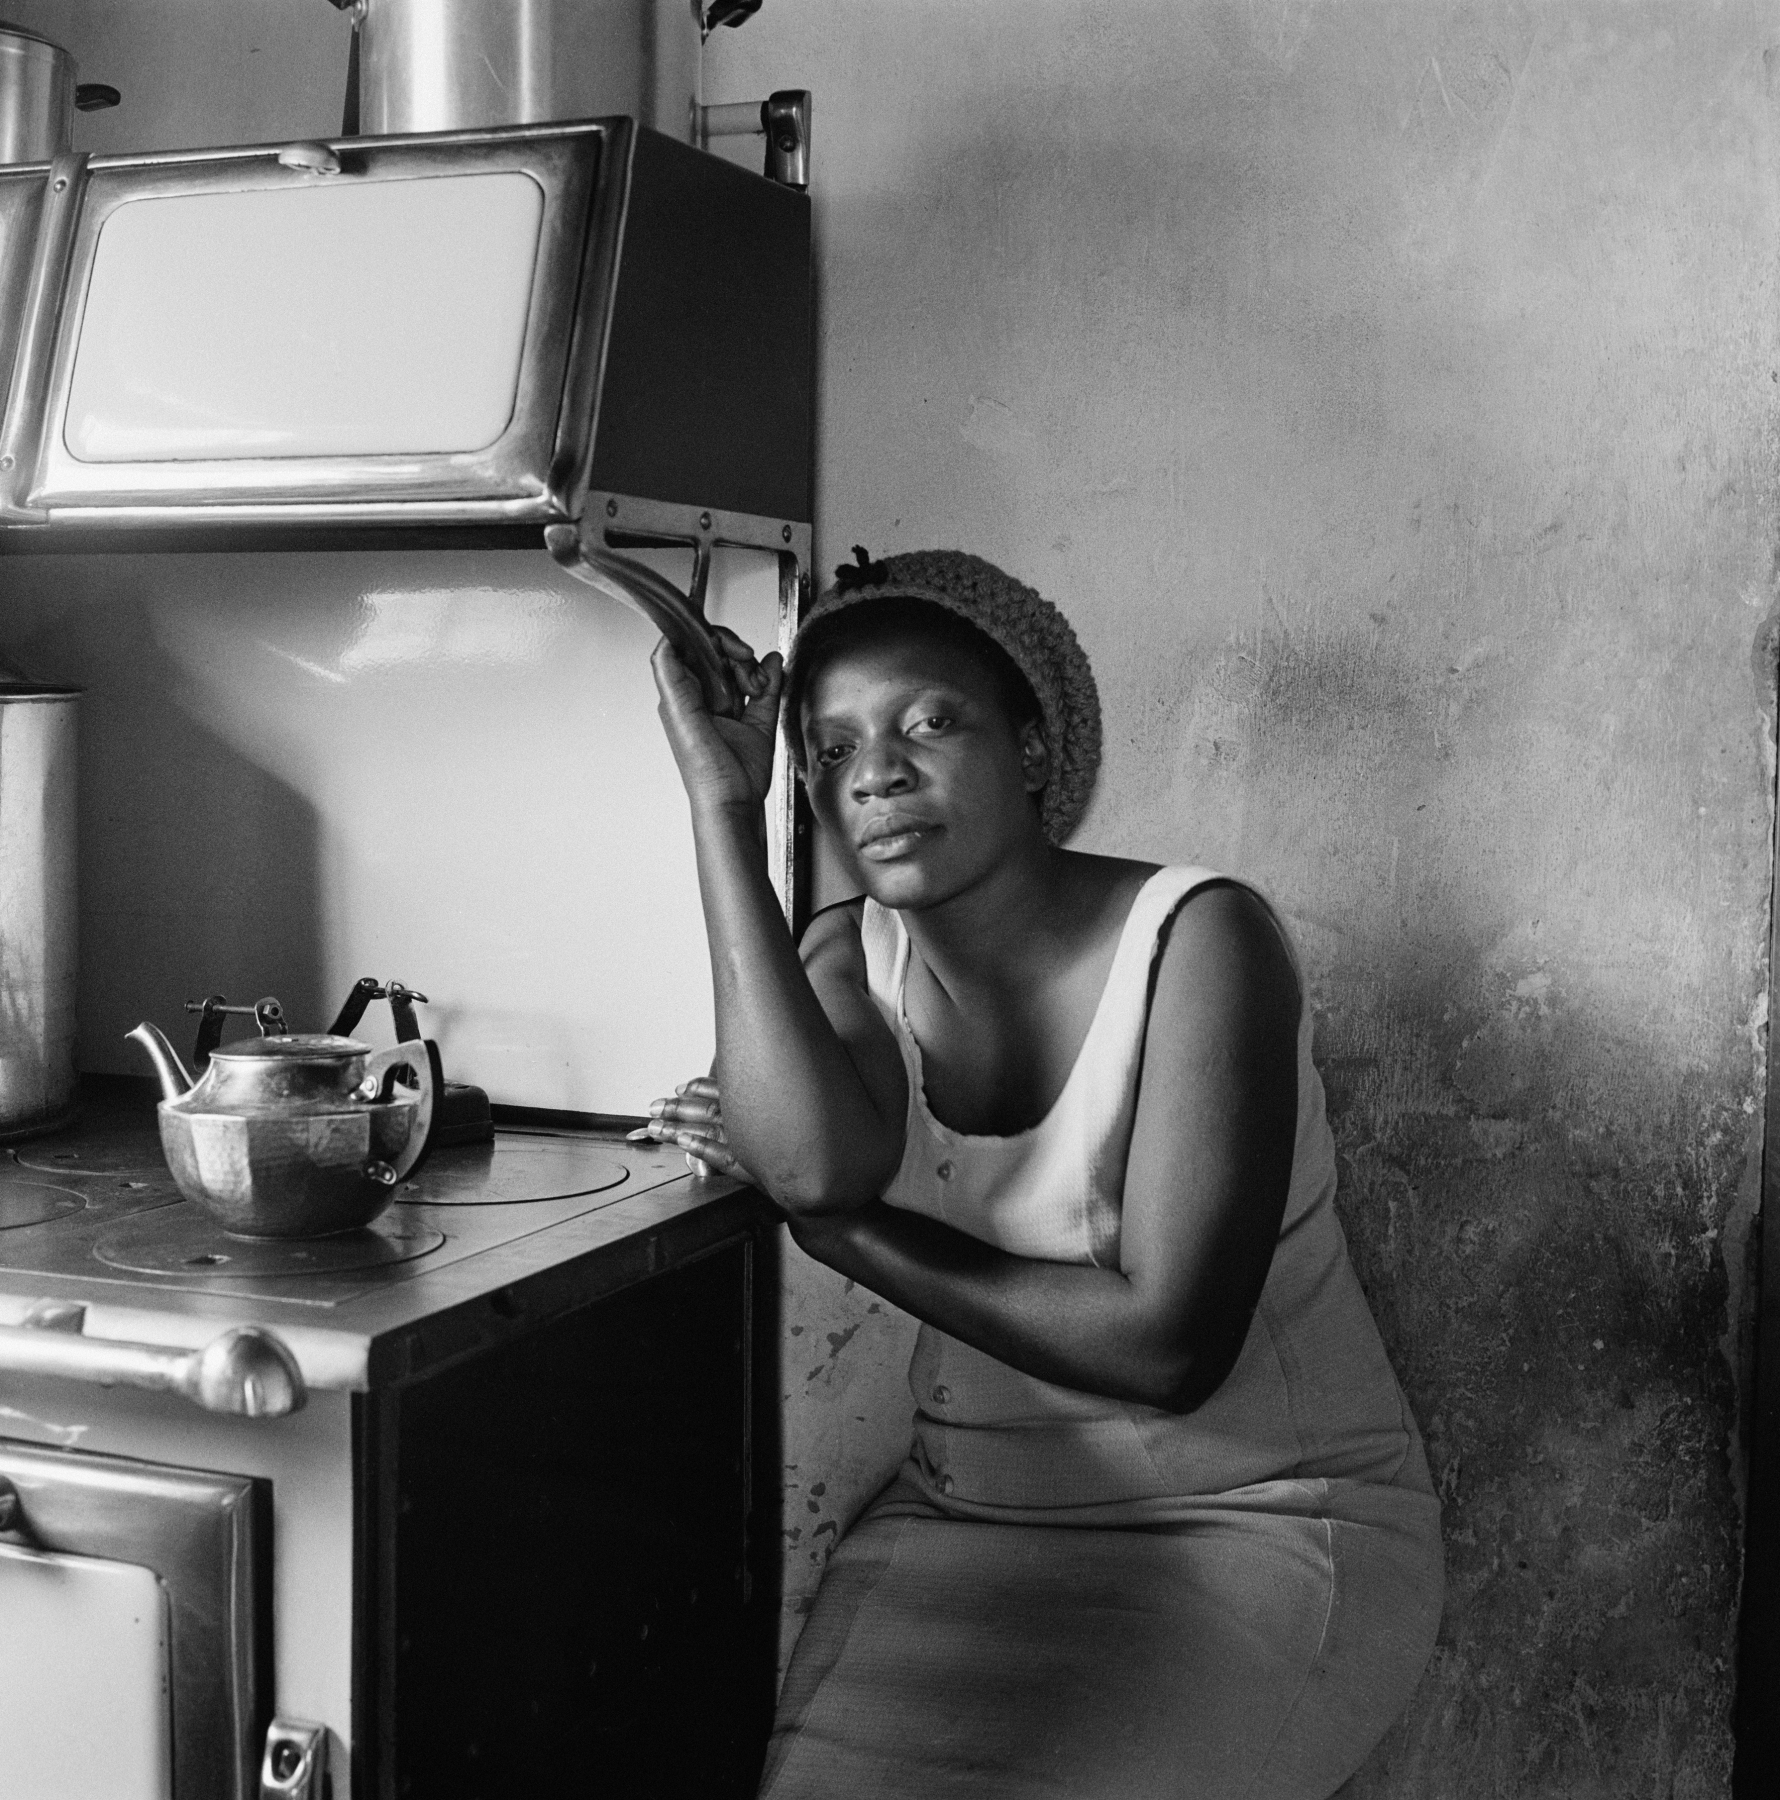 Patience Poni visiting her parents, Ruth and Jackson Poni, 1510A Emdeni South, Soweto,1972

Silver gelatin print on fibre-based paper

Image: 39.9 x 39.9 cm / 15.7 x 15.7 in.
AP 2/3
&nbsp;